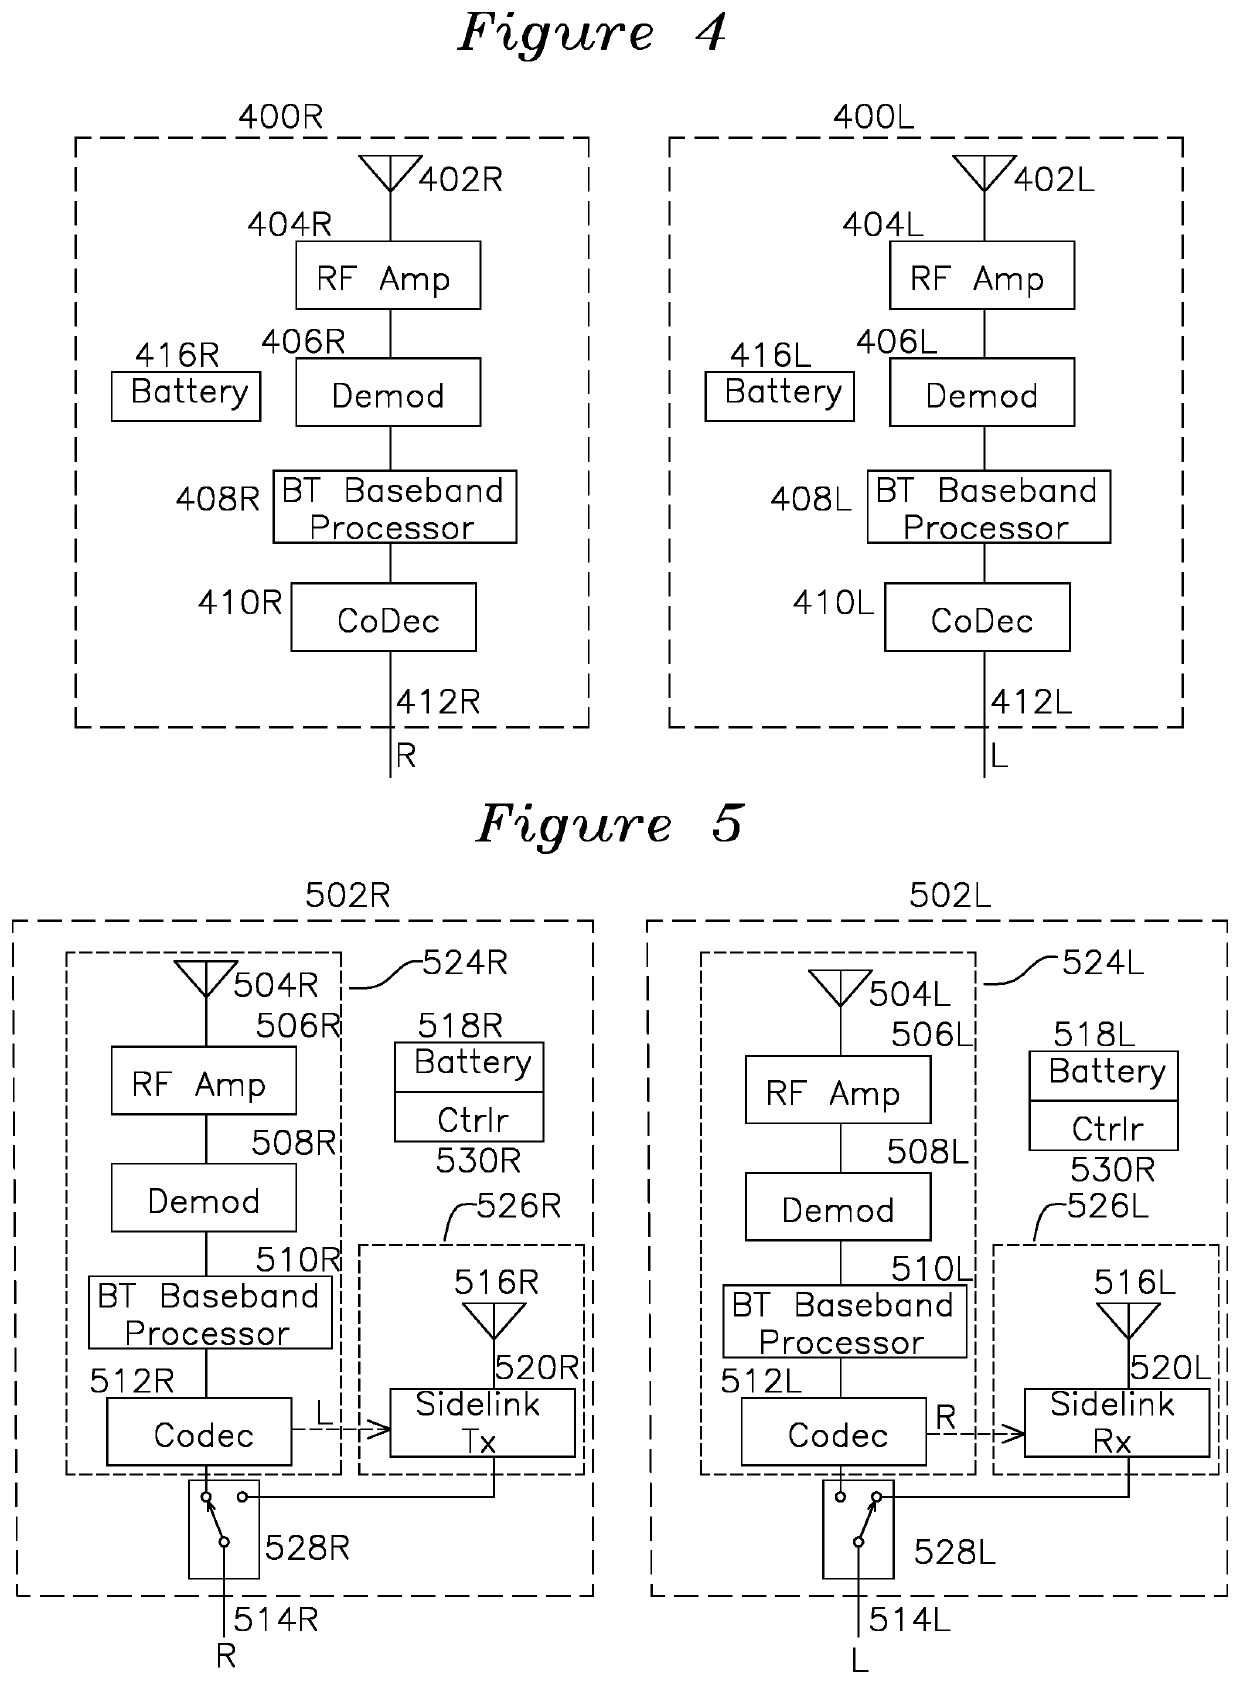 Wire-Free Bluetooth Communication System with RSSI-based Dynamic Switchover